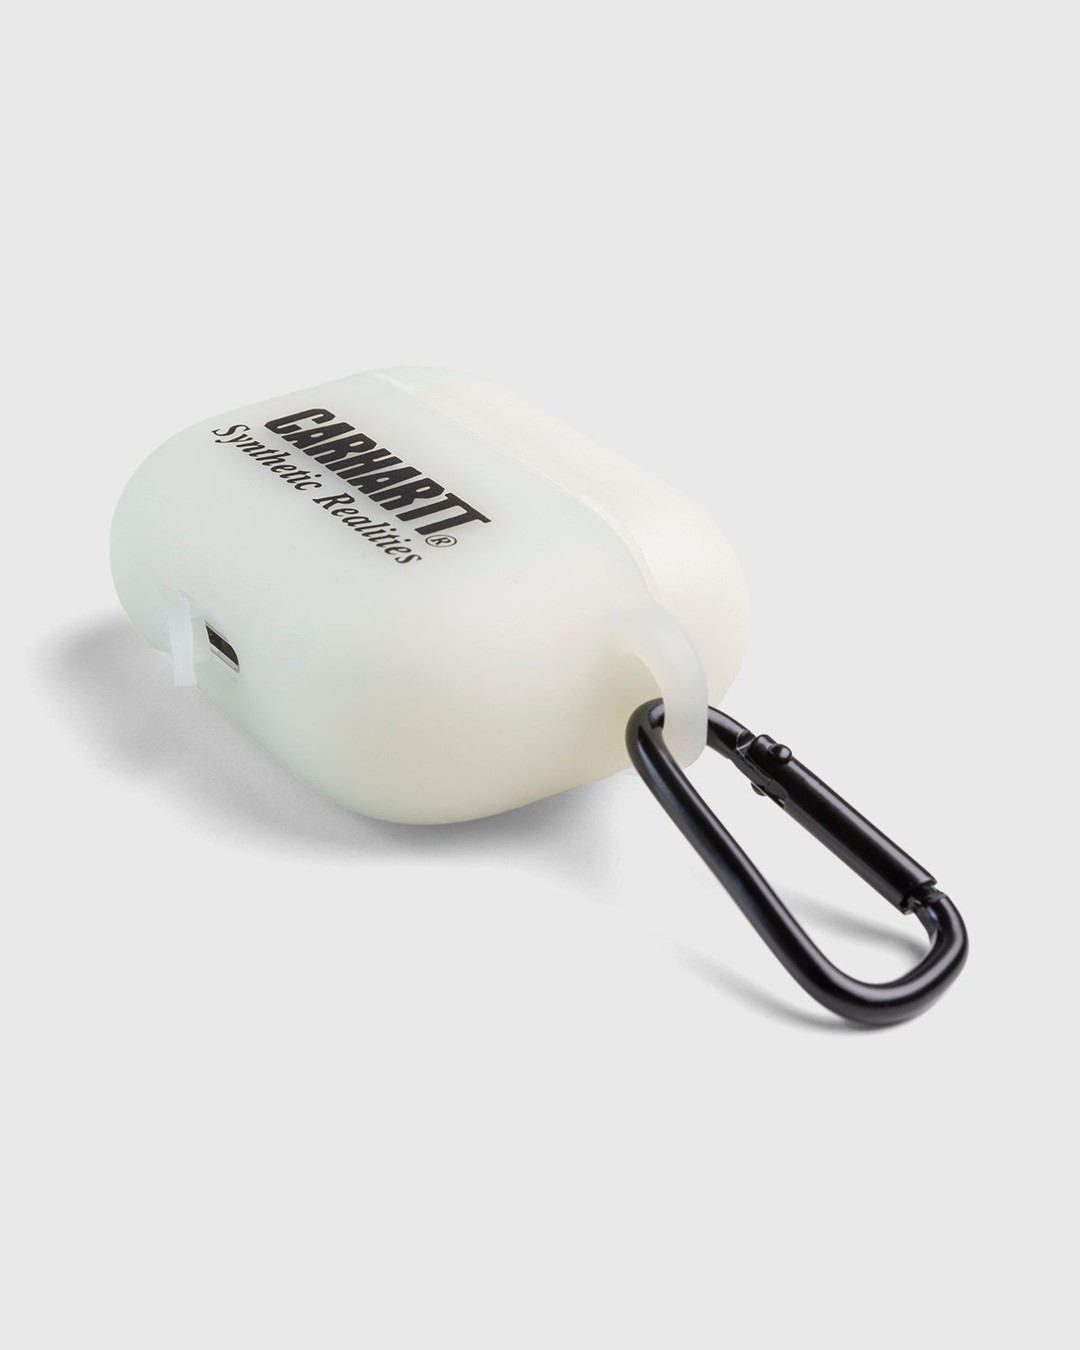 Carhartt WIP – Synthetic Realities AirPods Case Glow In The Dark Black - Air Pod Cases - White - Image 3